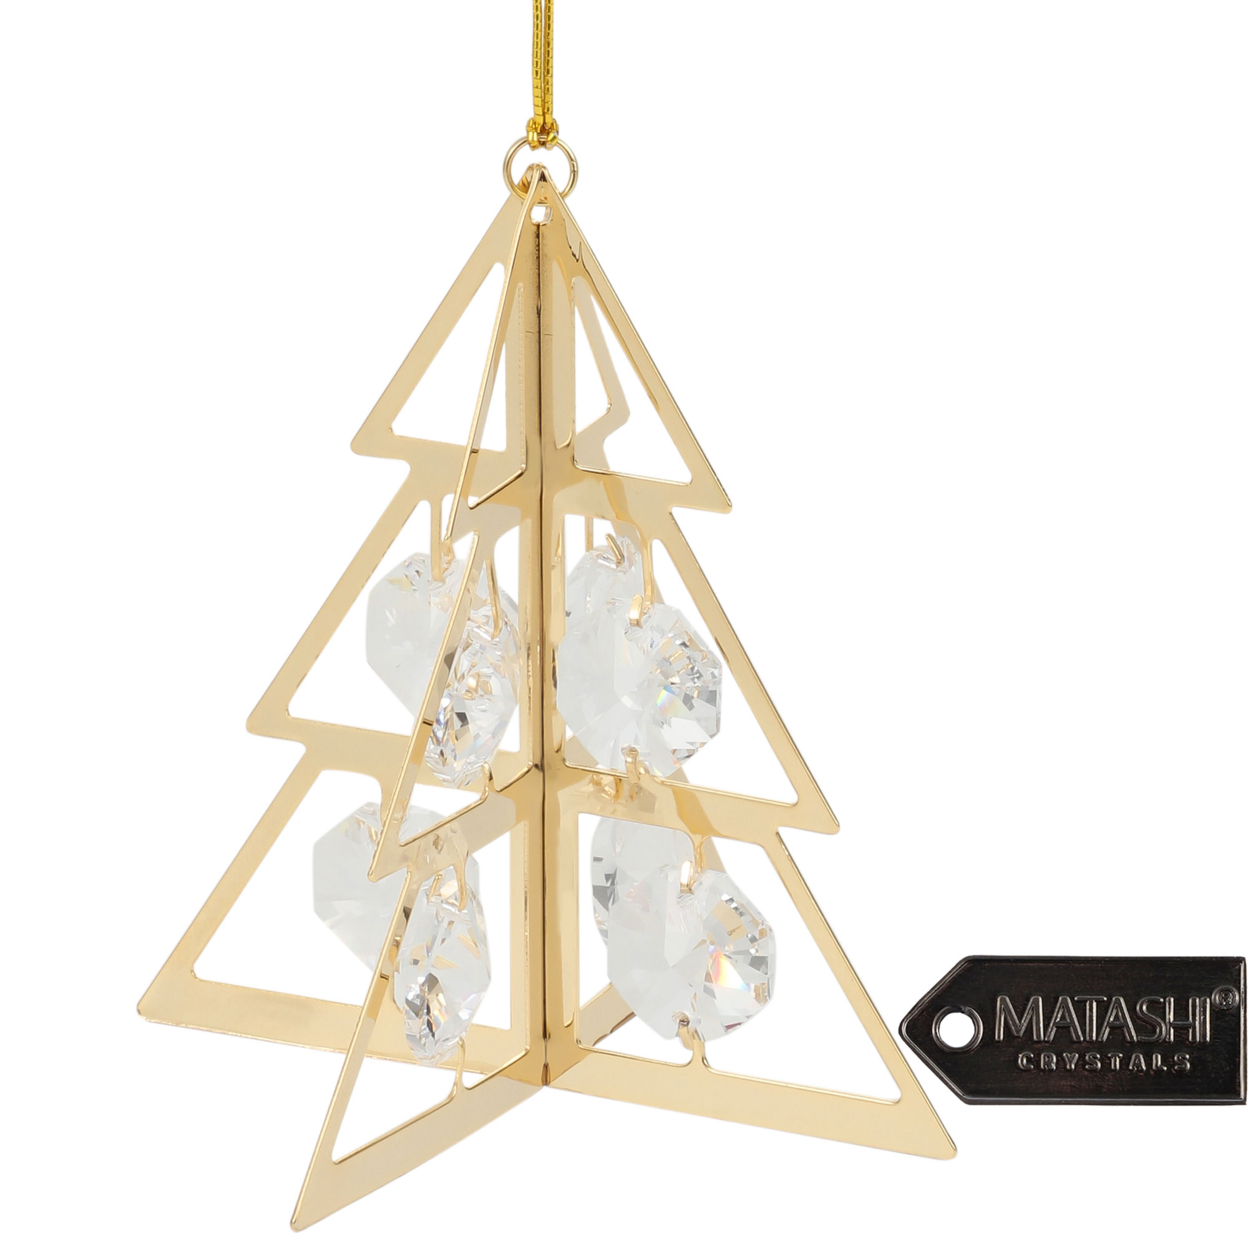 24K Gold Plated Crystal Studded Christmas Tree Ornament Hanging Ornament By Matashi